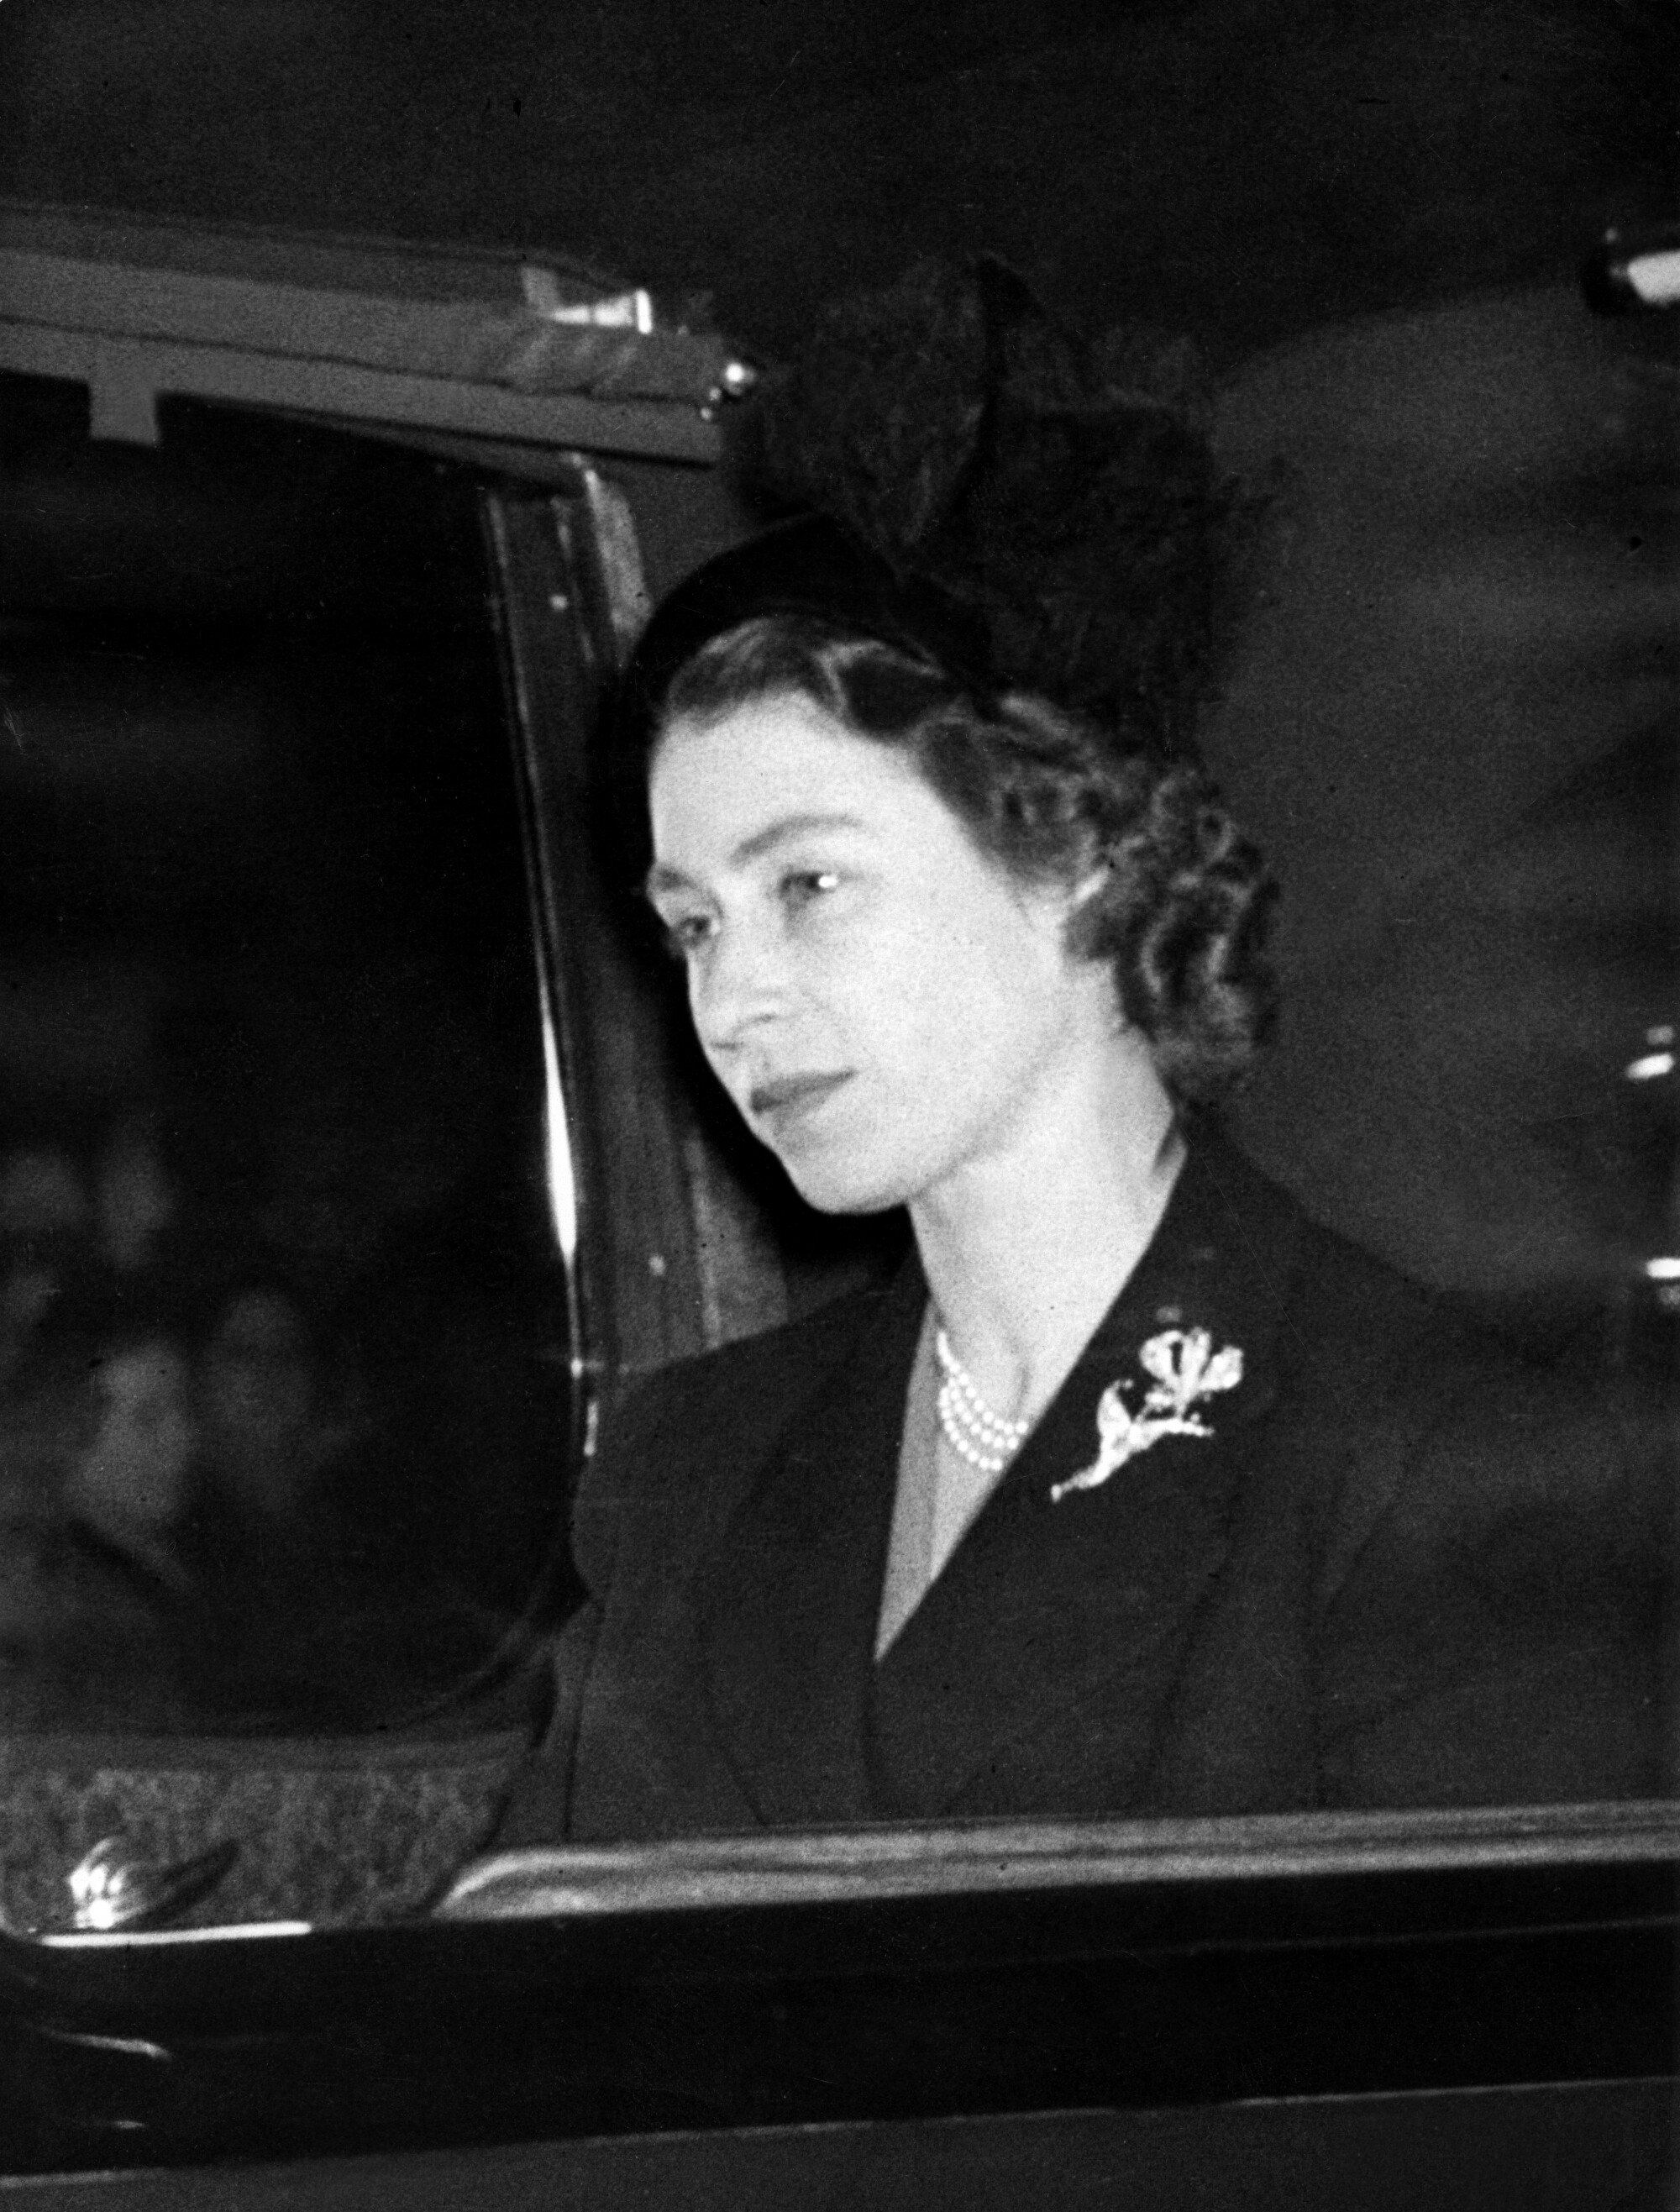 A woman in a dark hat and suit is seen in a car